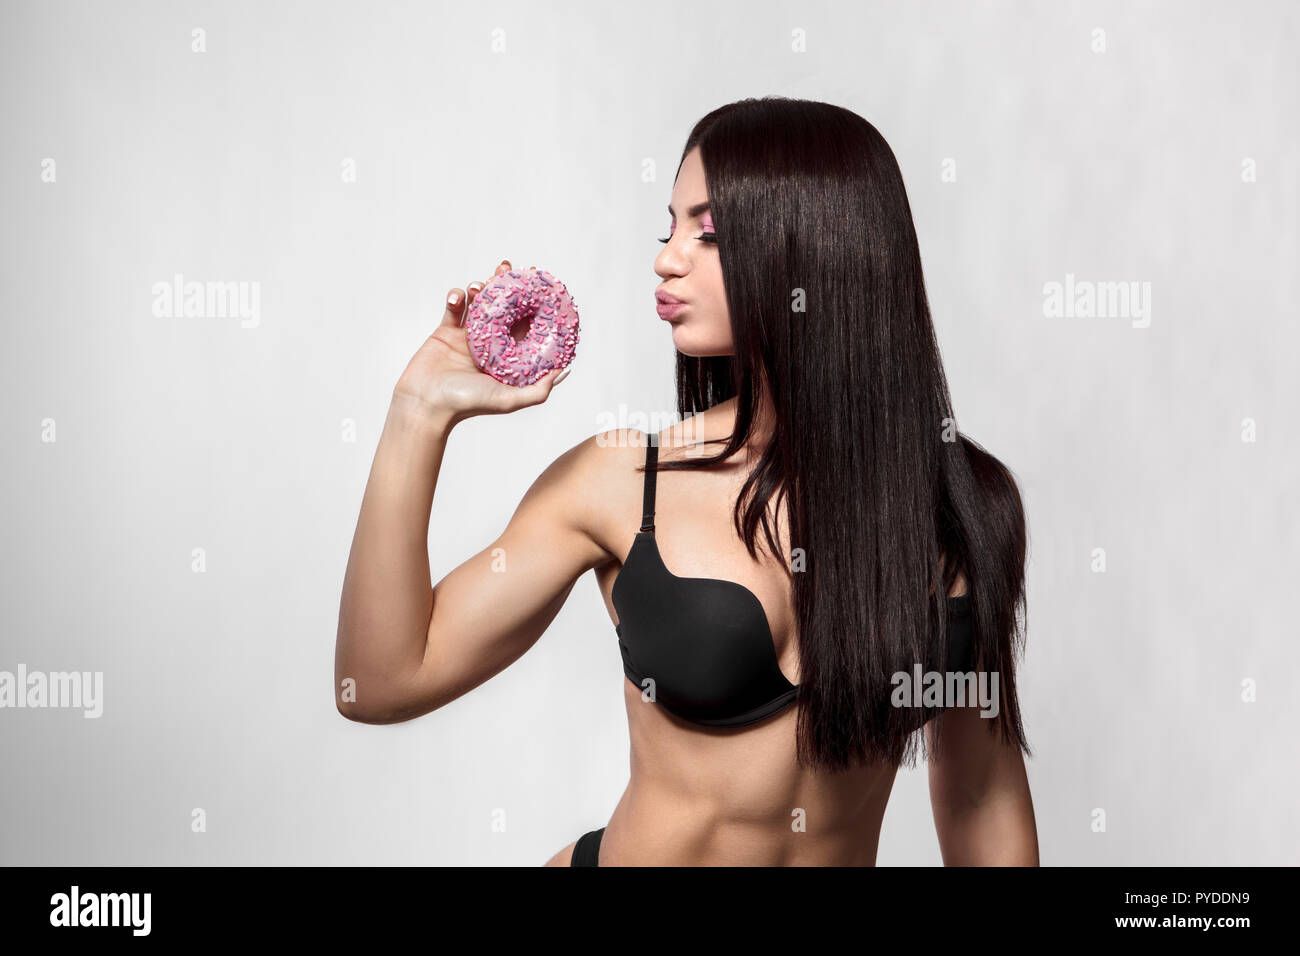 Playful Funny Plus Size Woman In Lingerie With Two Donuts Stock Photo,  Picture and Royalty Free Image. Image 128038485.